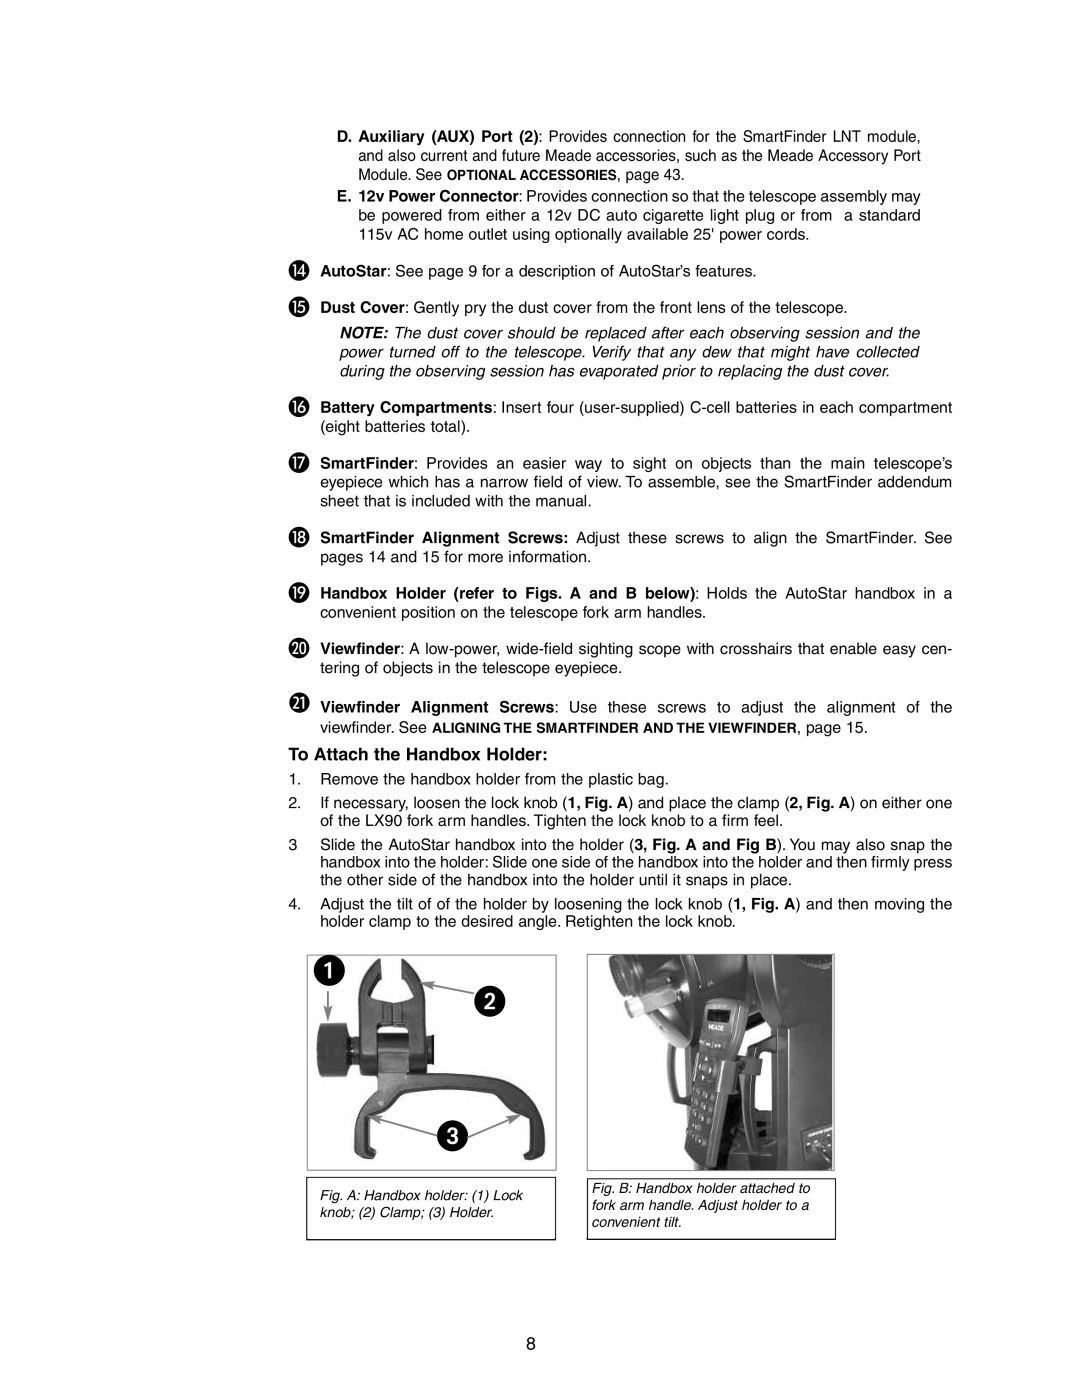 Meade LX90GPS instruction manual 1 2 3, To Attach the Handbox Holder 